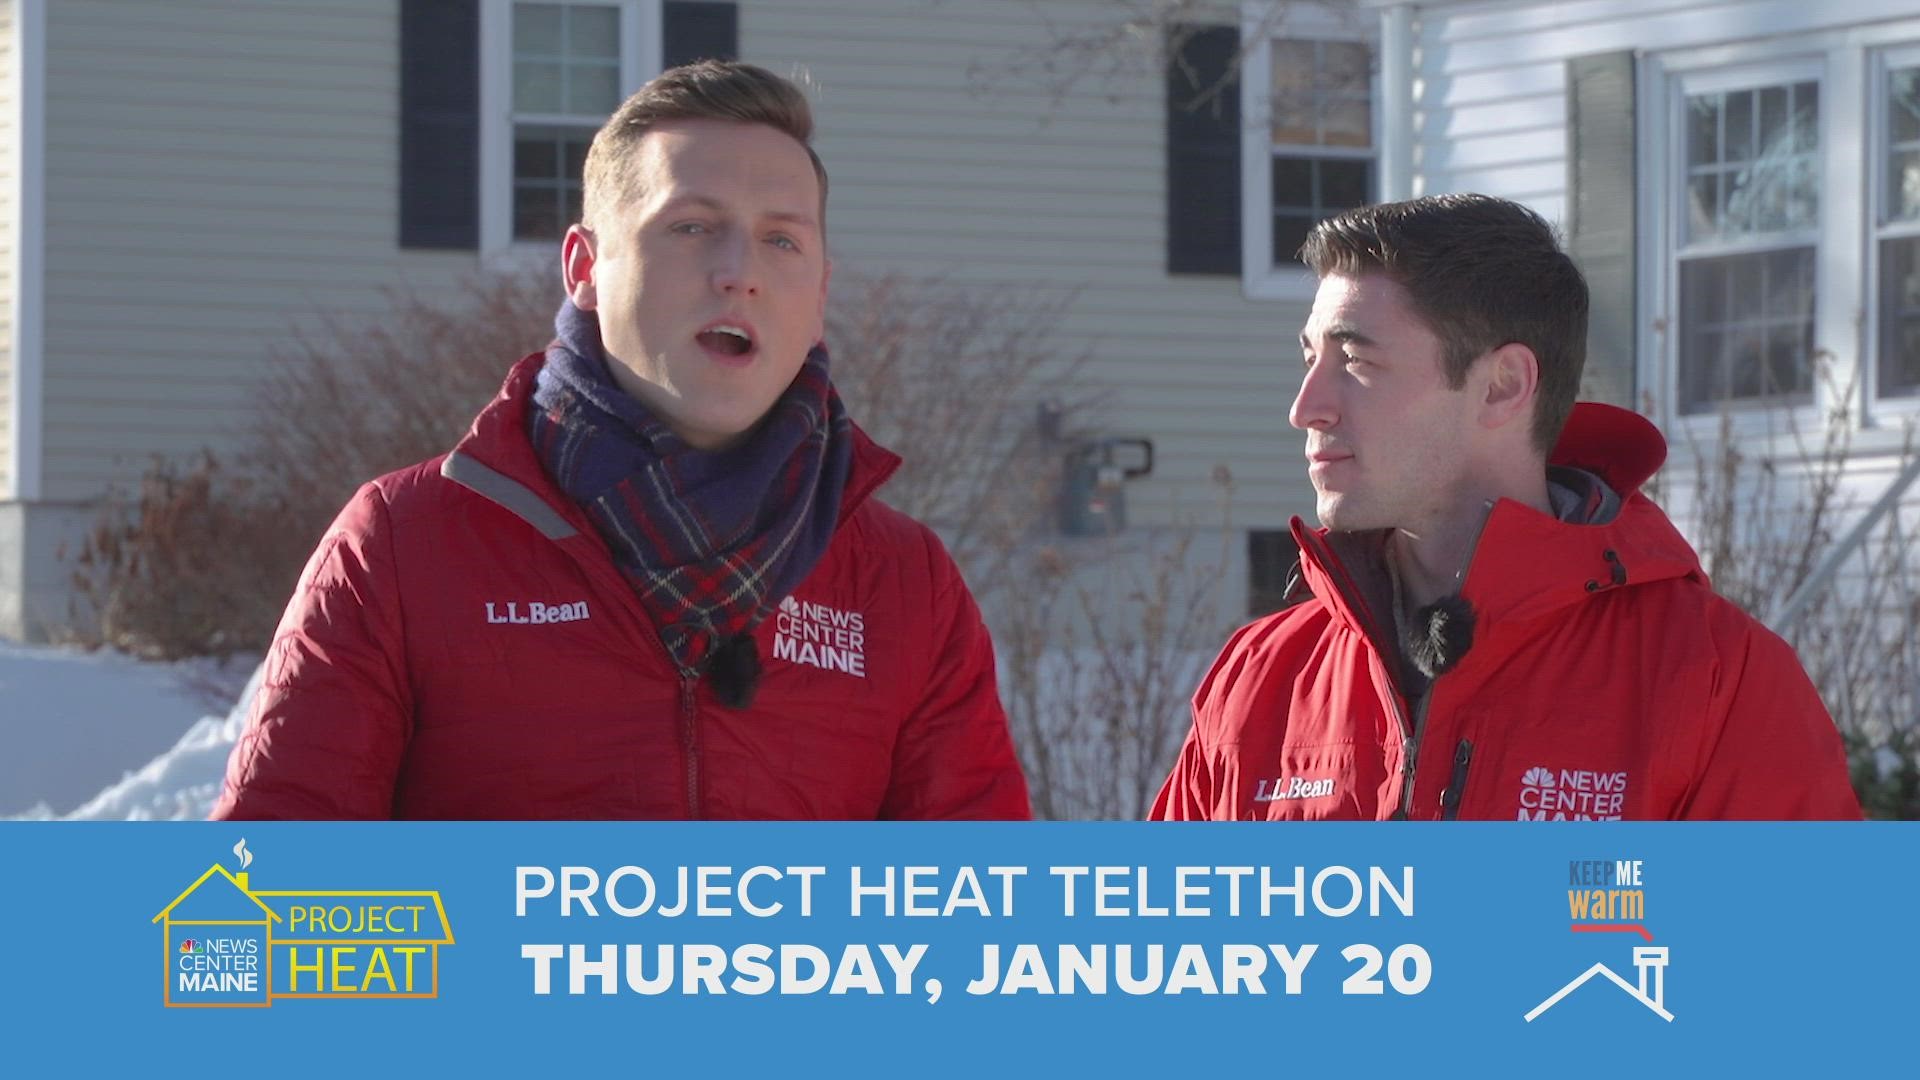 NEWS CENTER Maine is partnering with United Ways of Maine to raise money for heating assistance in Maine through NCM's 2022 Project Heat Telethon.